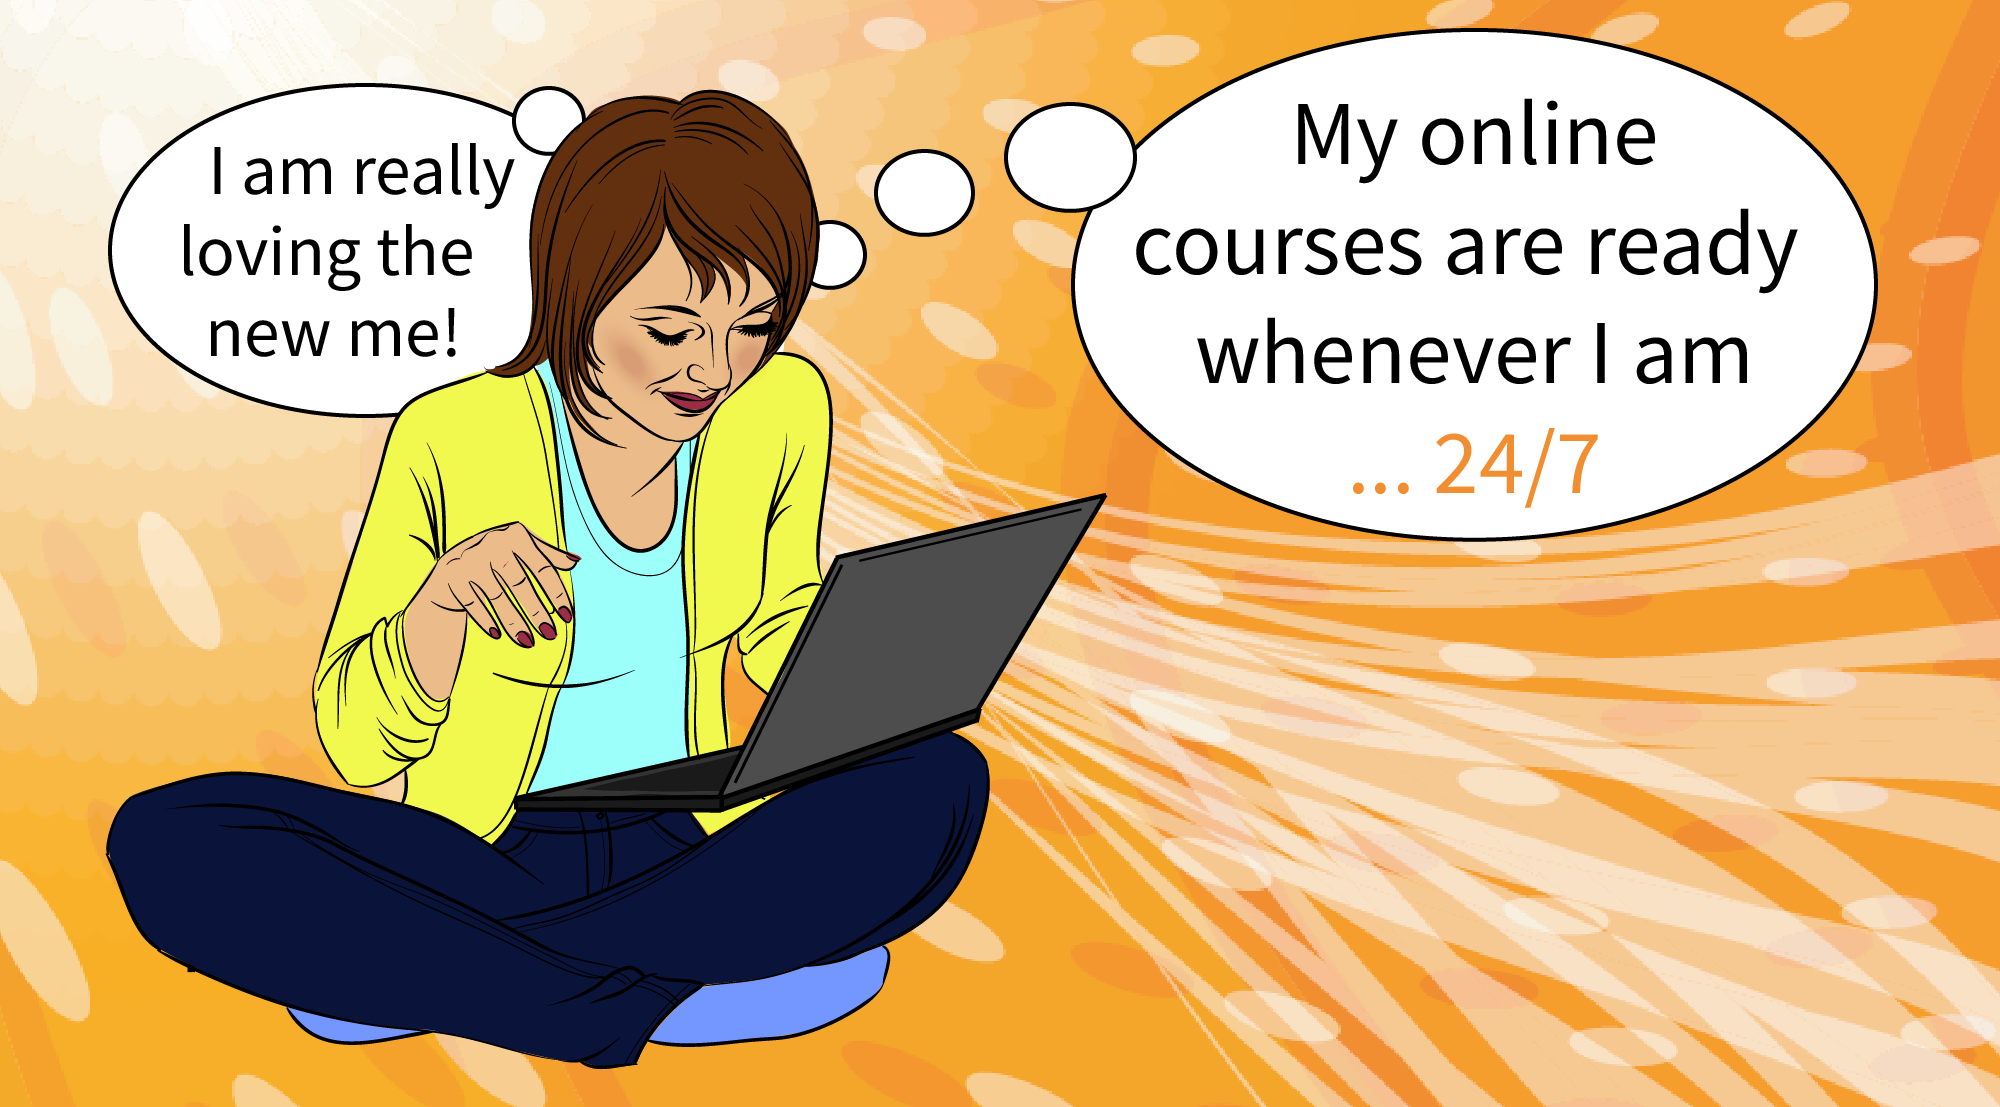 Illustration of woman using laptop for online learning